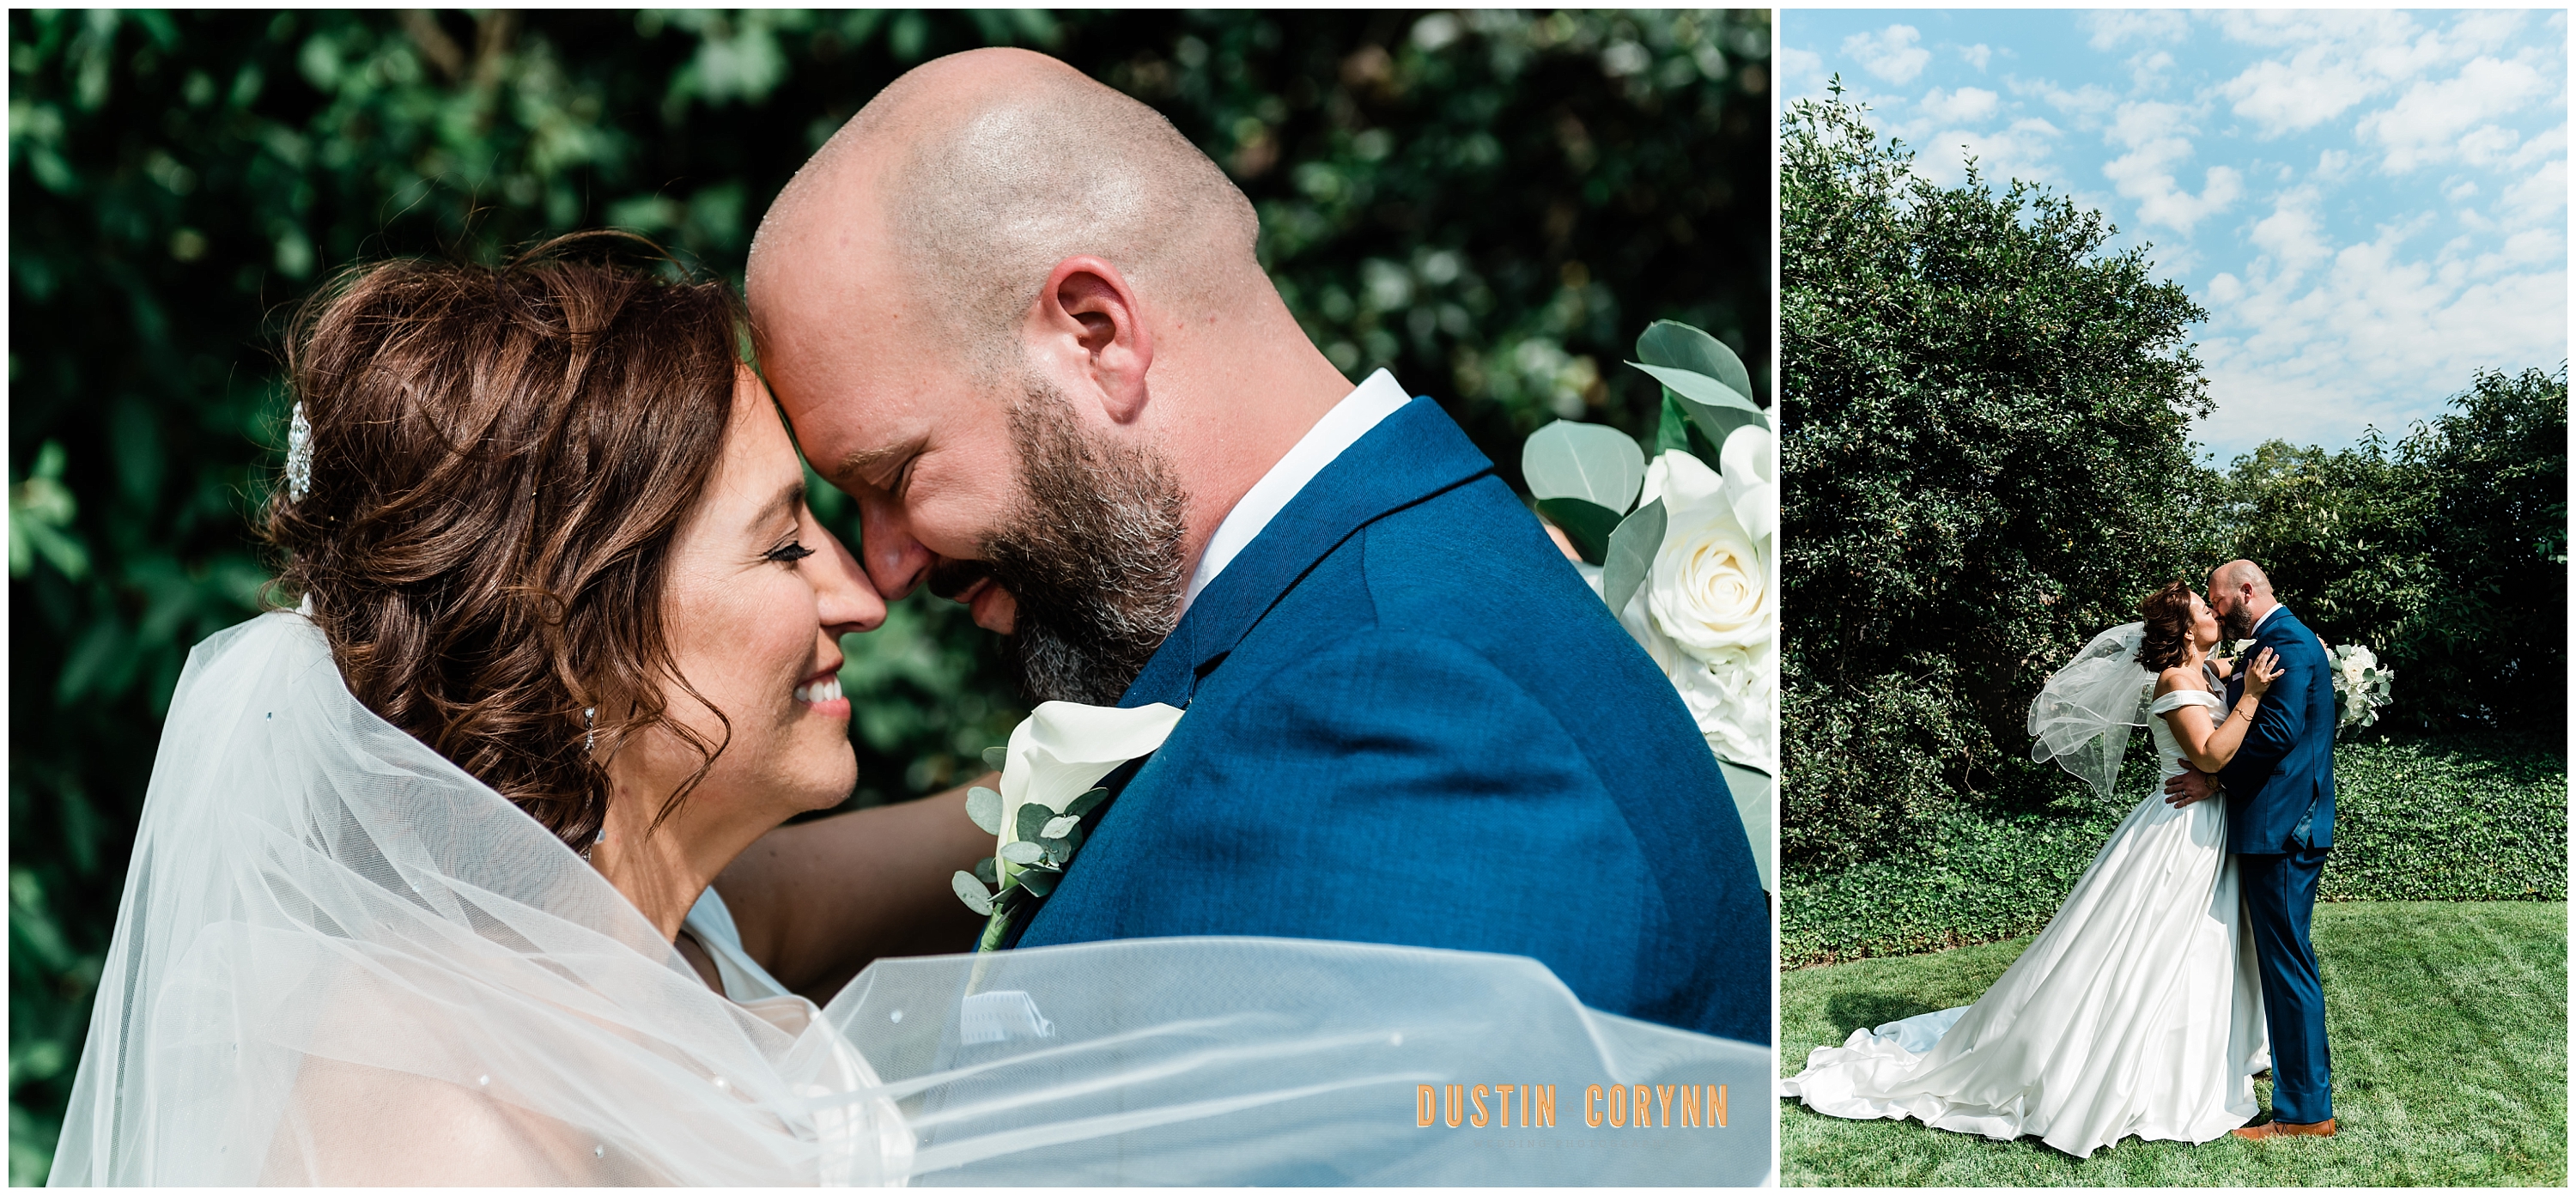 Wedding Day Portraits at Pine Valley Country Club Wedding